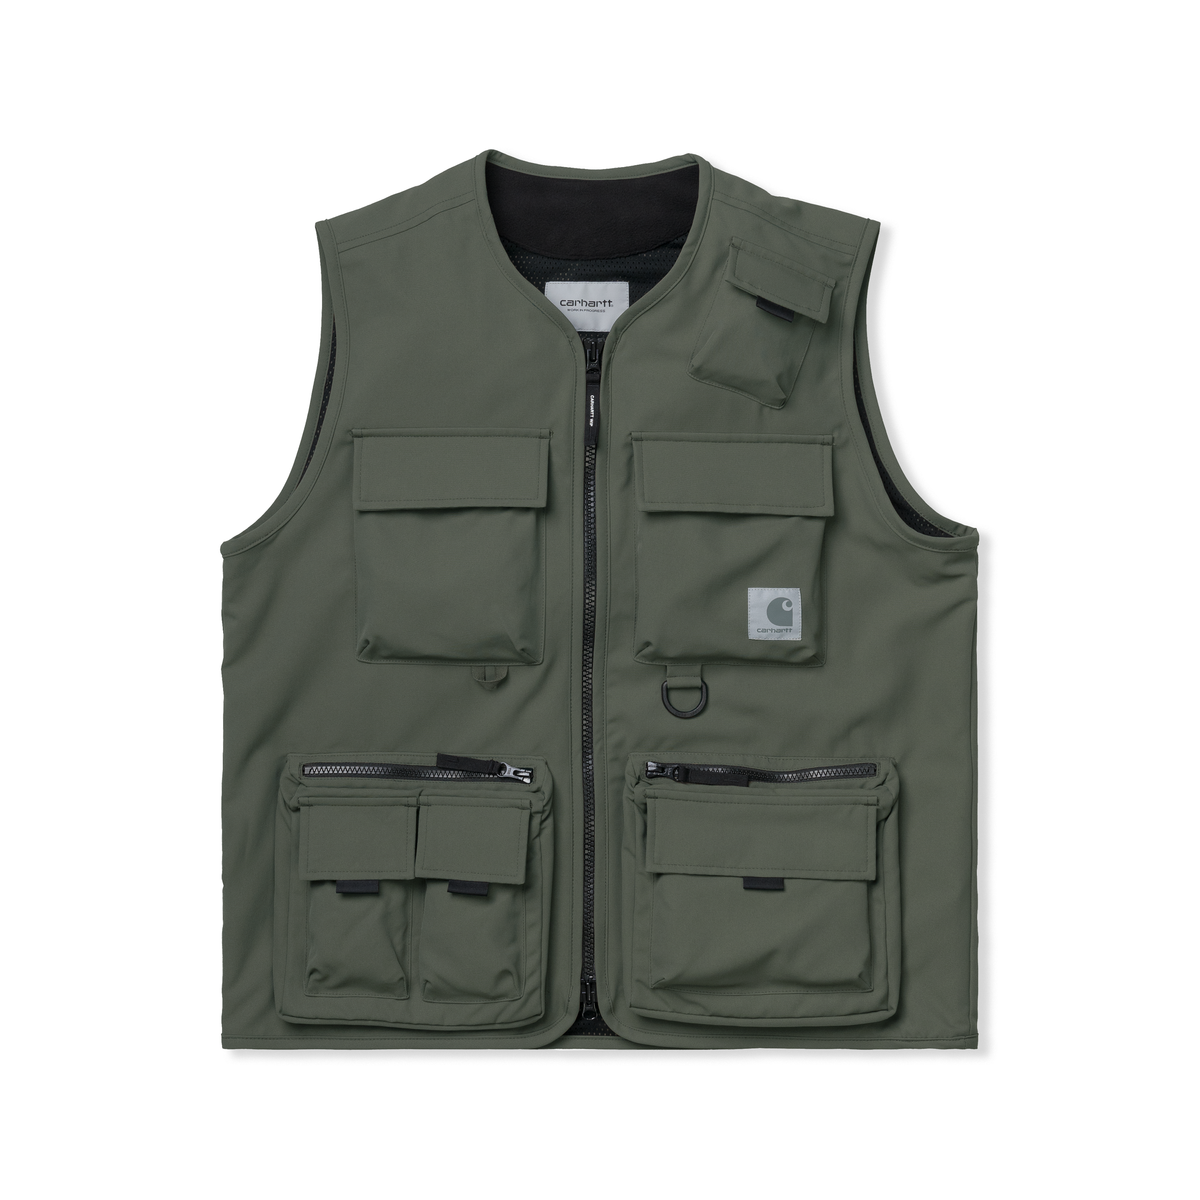 Explore our collection to find Elmwood Vest, Jura Carhartt WIP